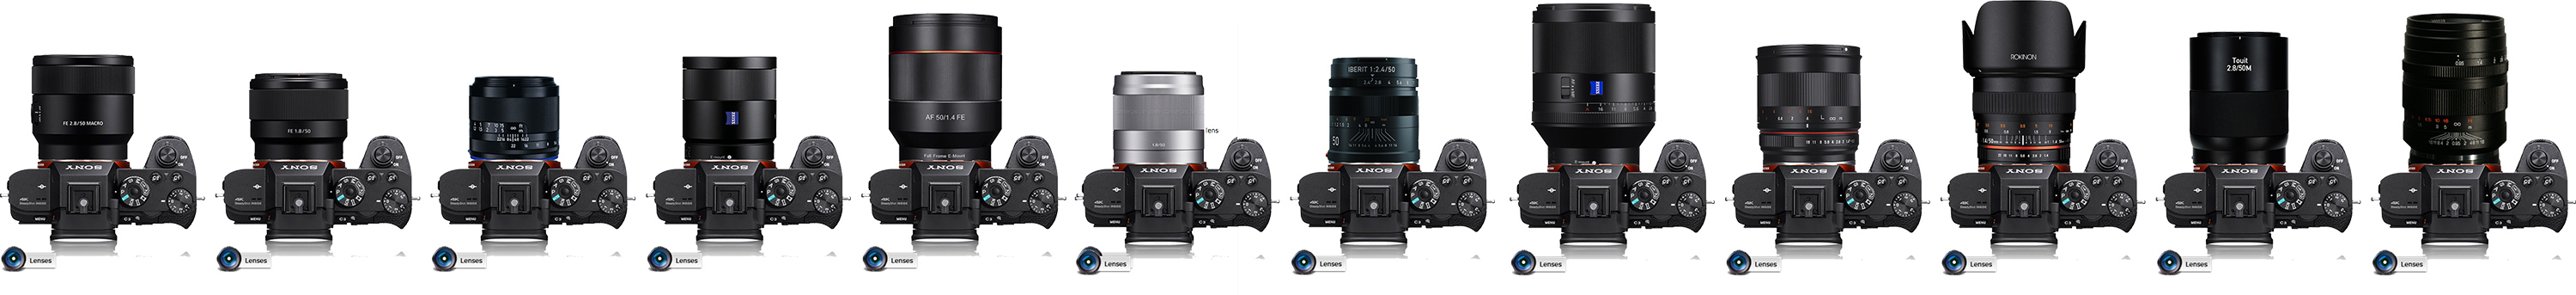 Sony 50mm f/1.4 GM size comparison with other lenses – sonyalpharumors